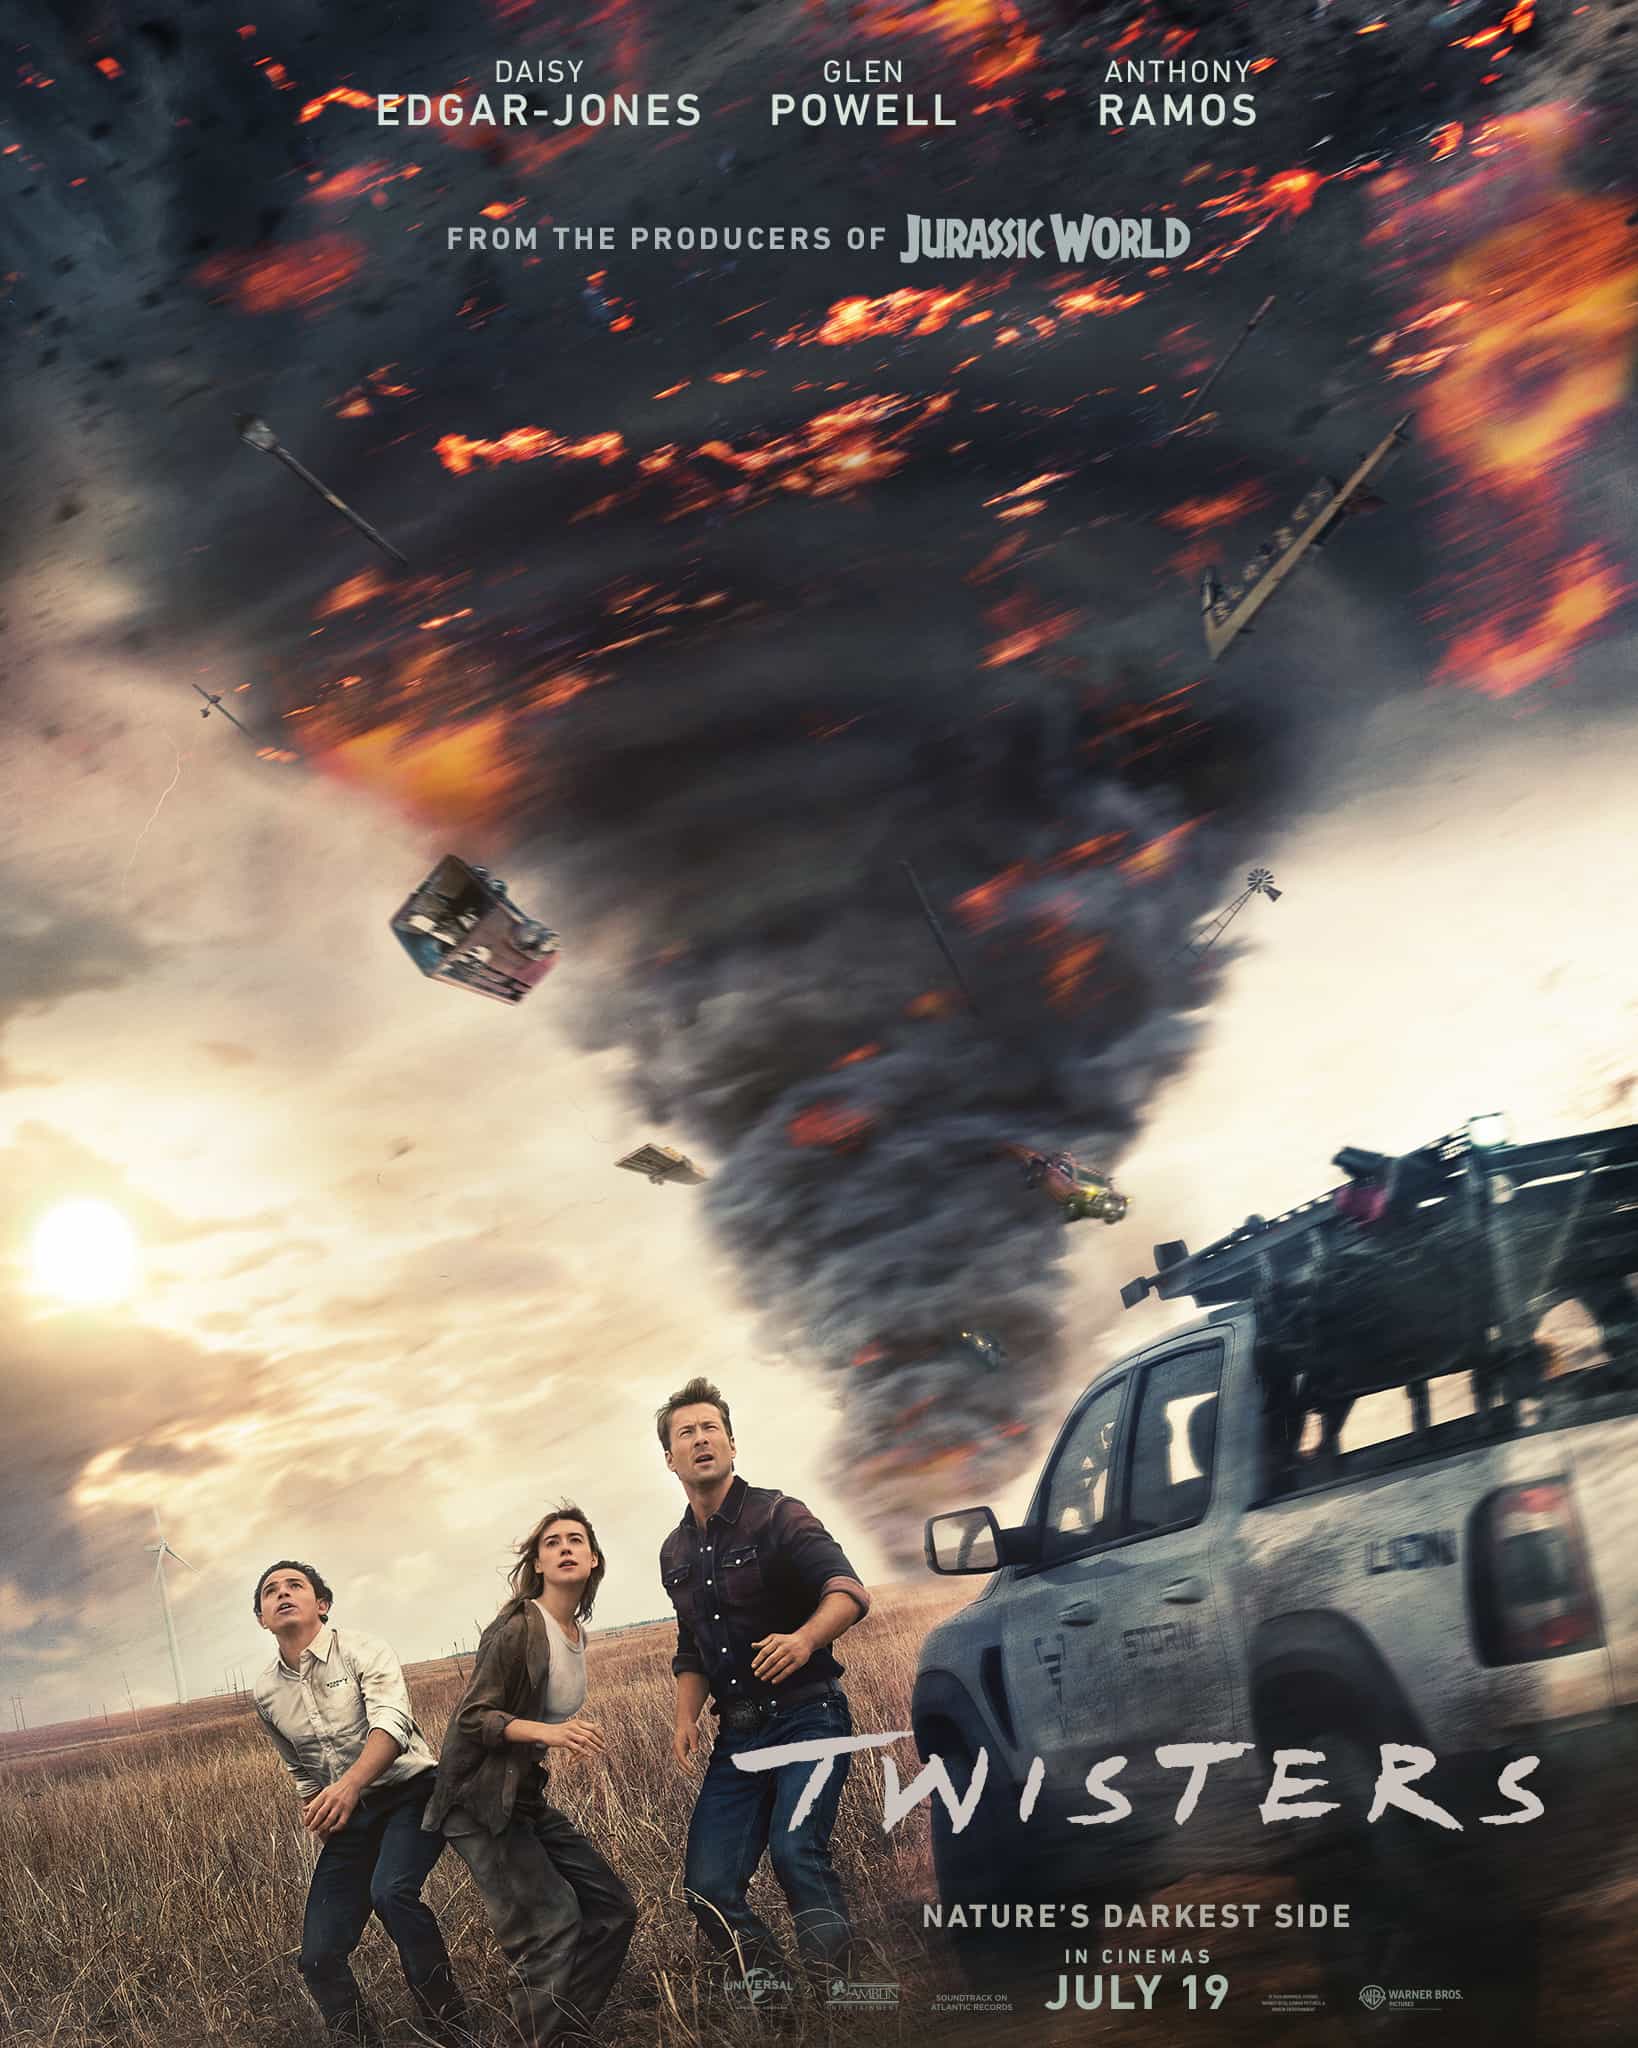 Check out the new trailer and poster for upcoming movie Twisters which stars Glen Powell and Daisy Edgar-Jones - movie UK release date 19th July 2024 #twisters